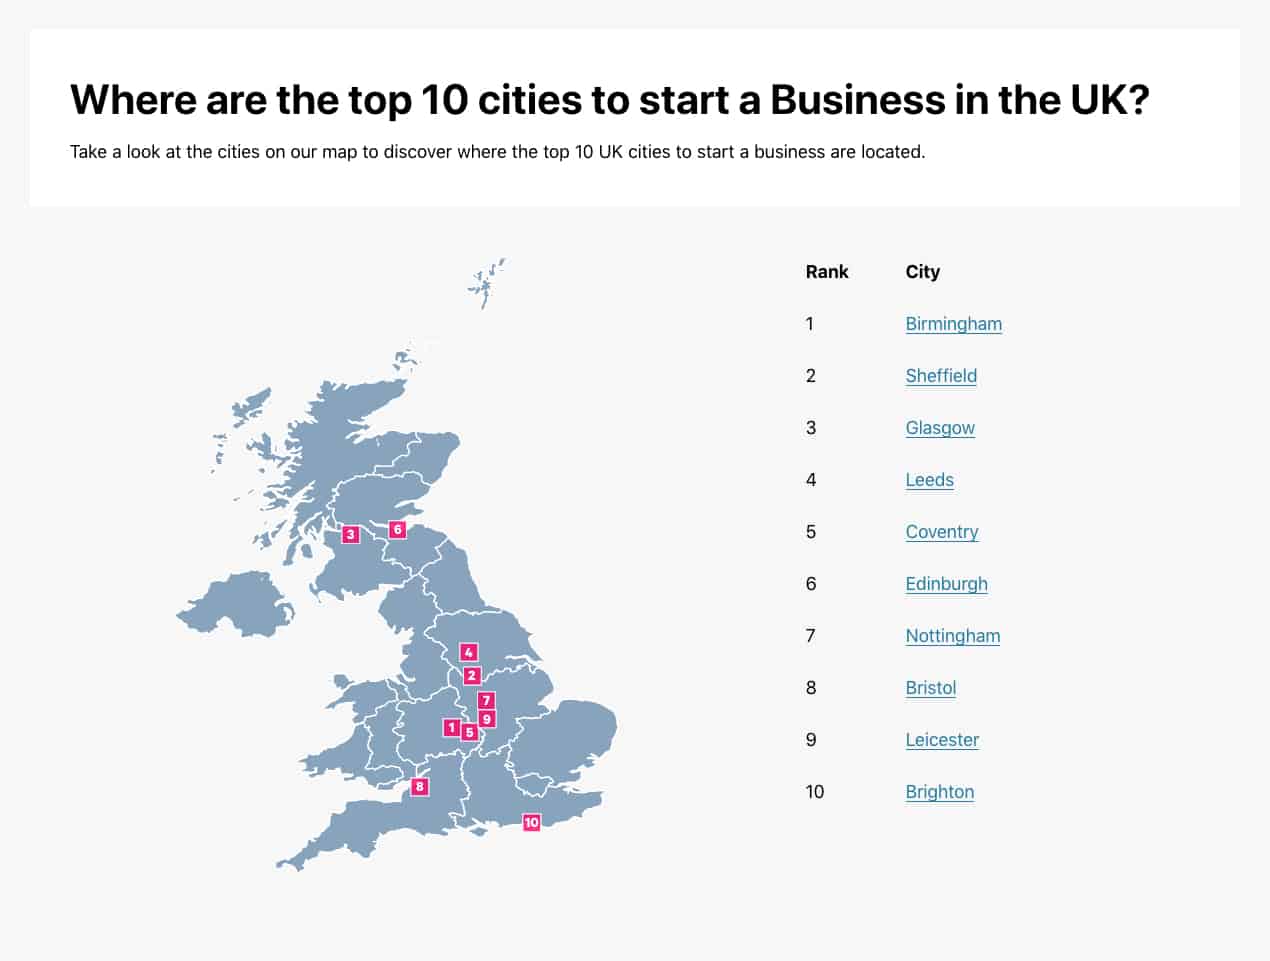 Where are the top 10 places to start a business in the UK?